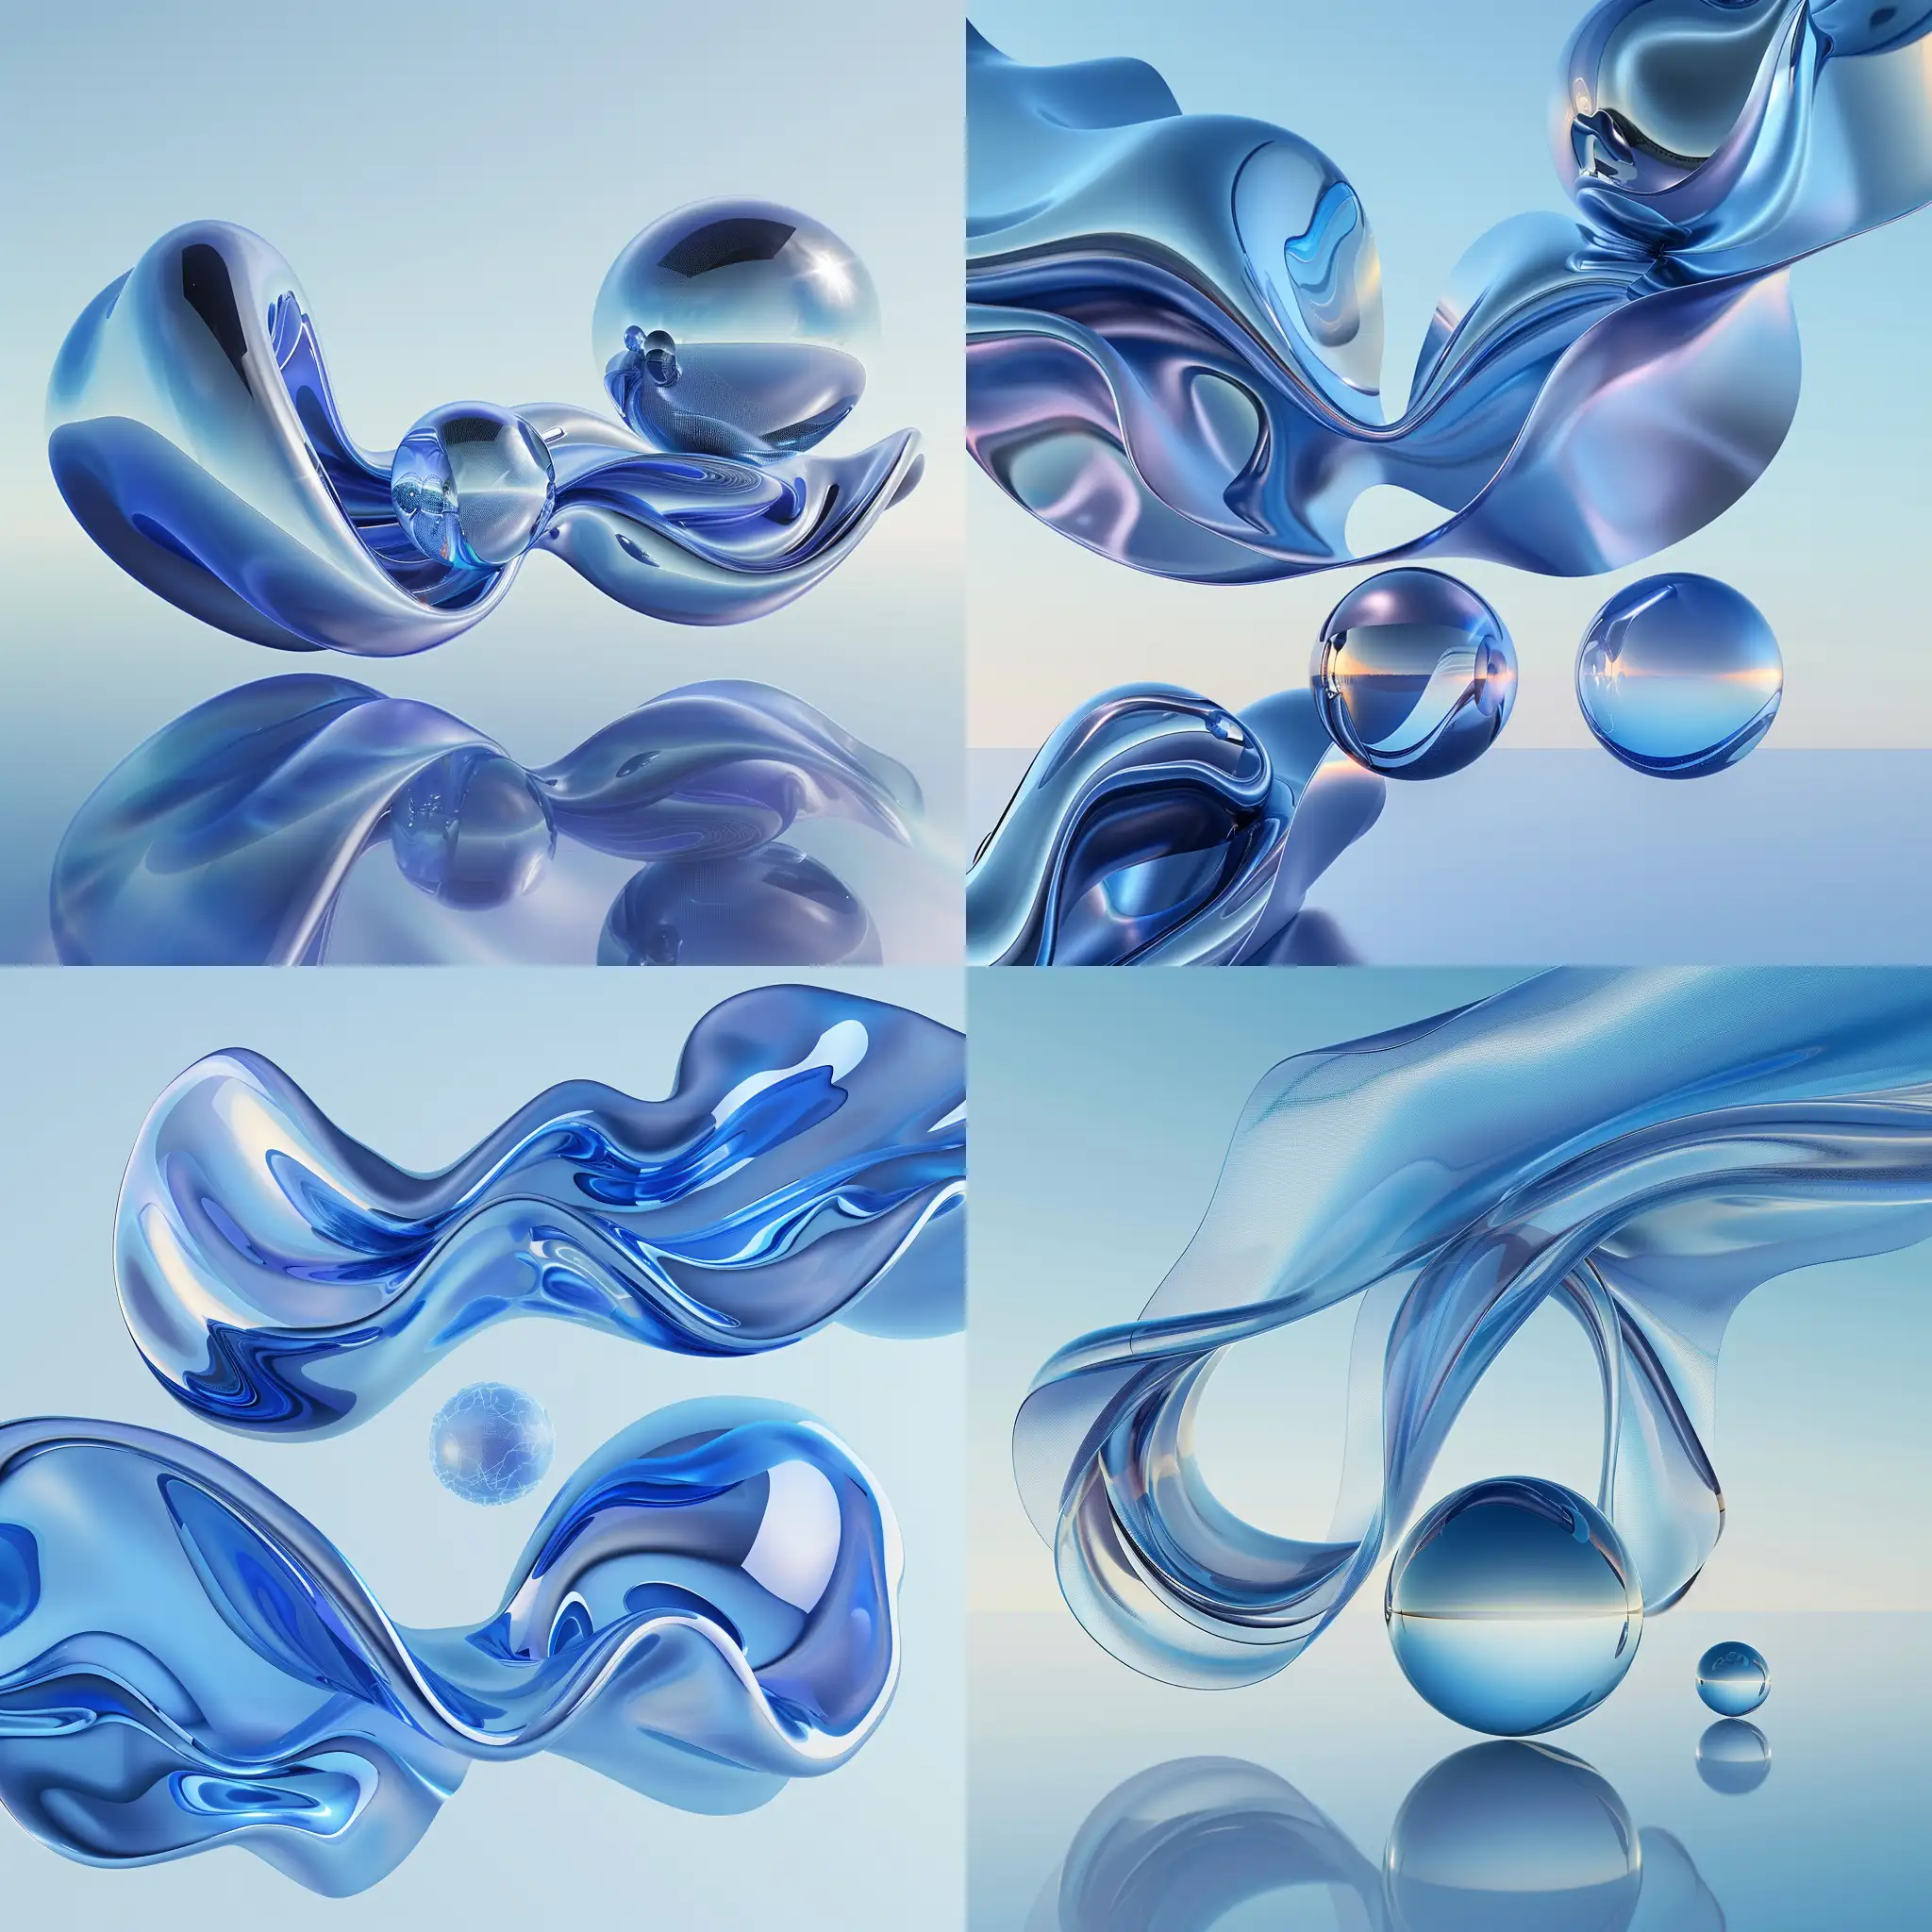 Innovative-Data-Flow-Fluid-Shapes-and-Reflective-Spheres-in-Blue-Palette